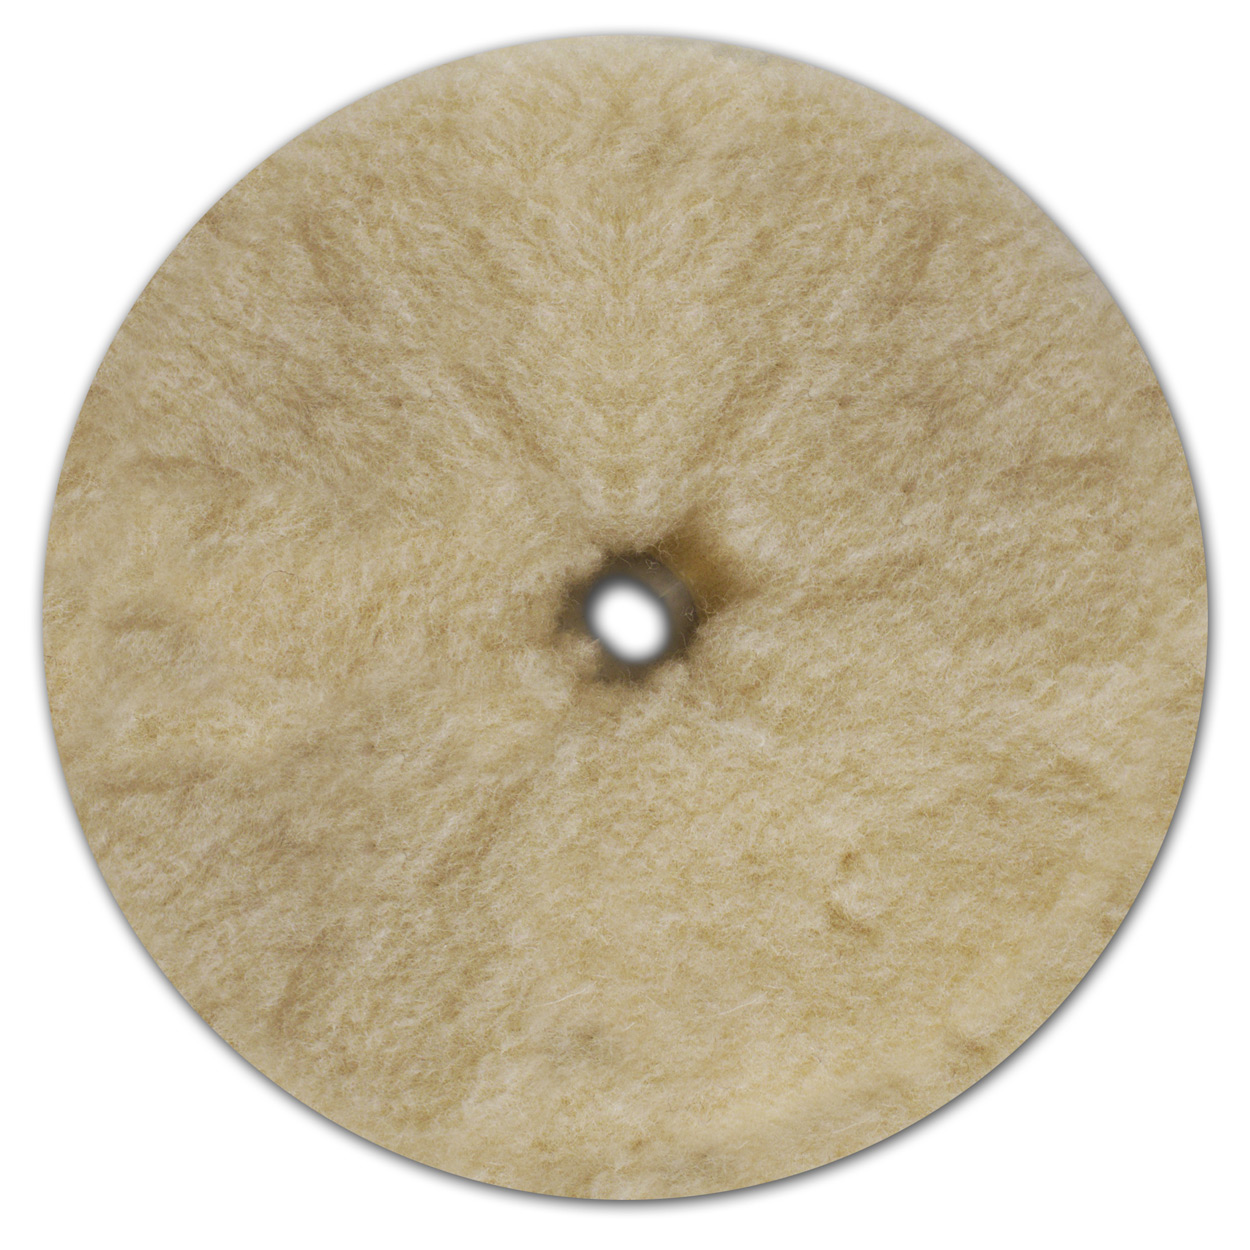 Prewashed Lambswool Buffing Pad – 7.5in